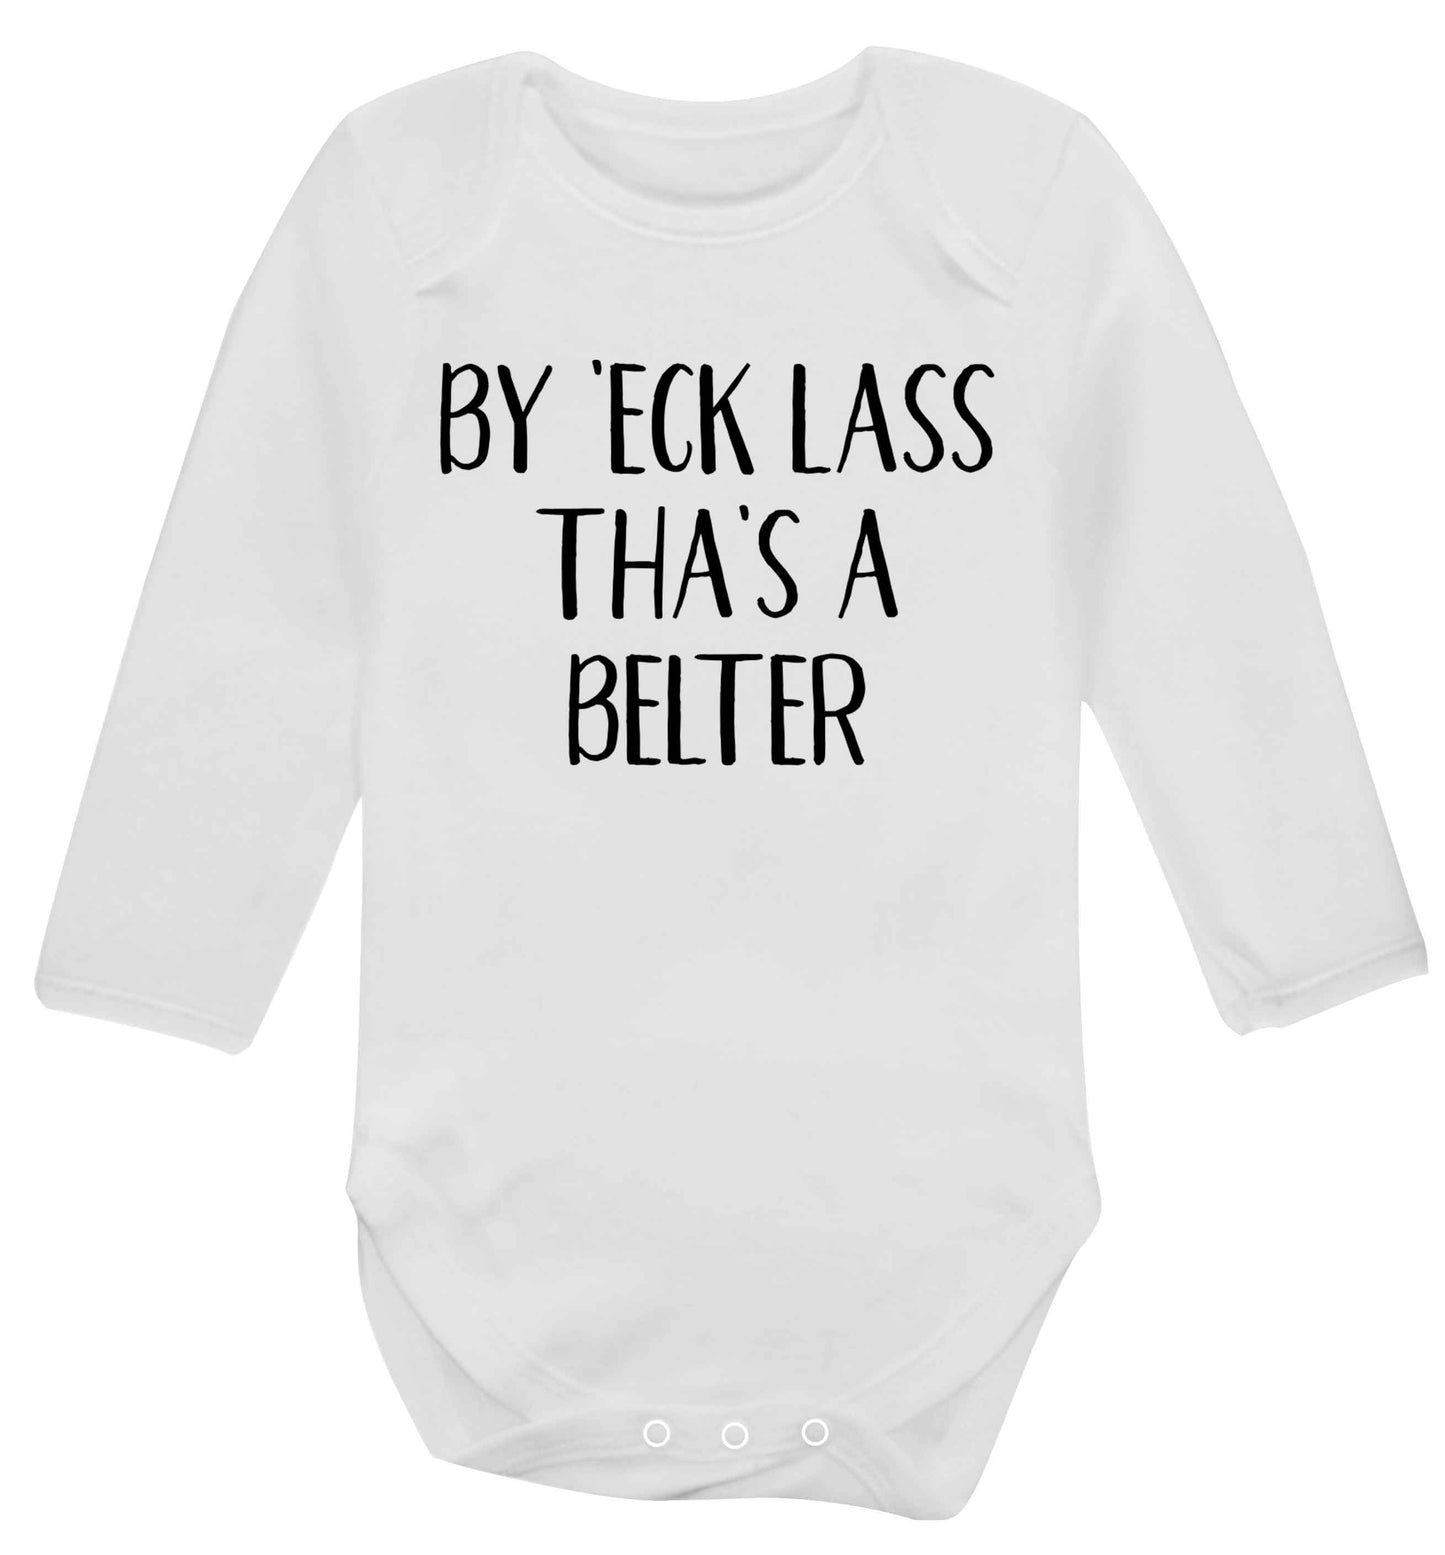 Be 'eck lass tha's a belter Baby Vest long sleeved white 6-12 months